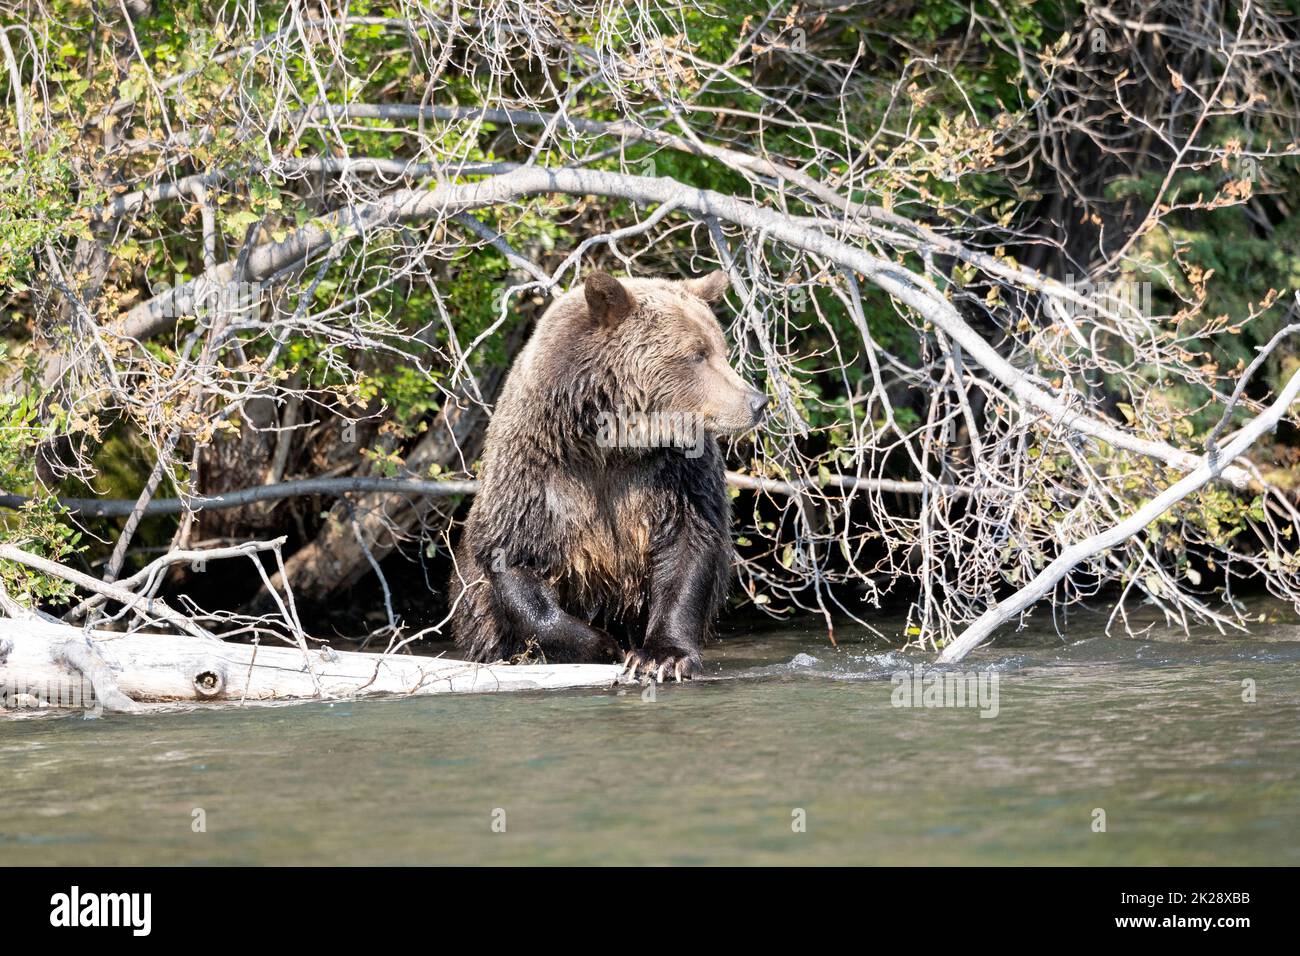 Grizzly Bear Chilko River Framed by Branches Dead Tree Stock Photo